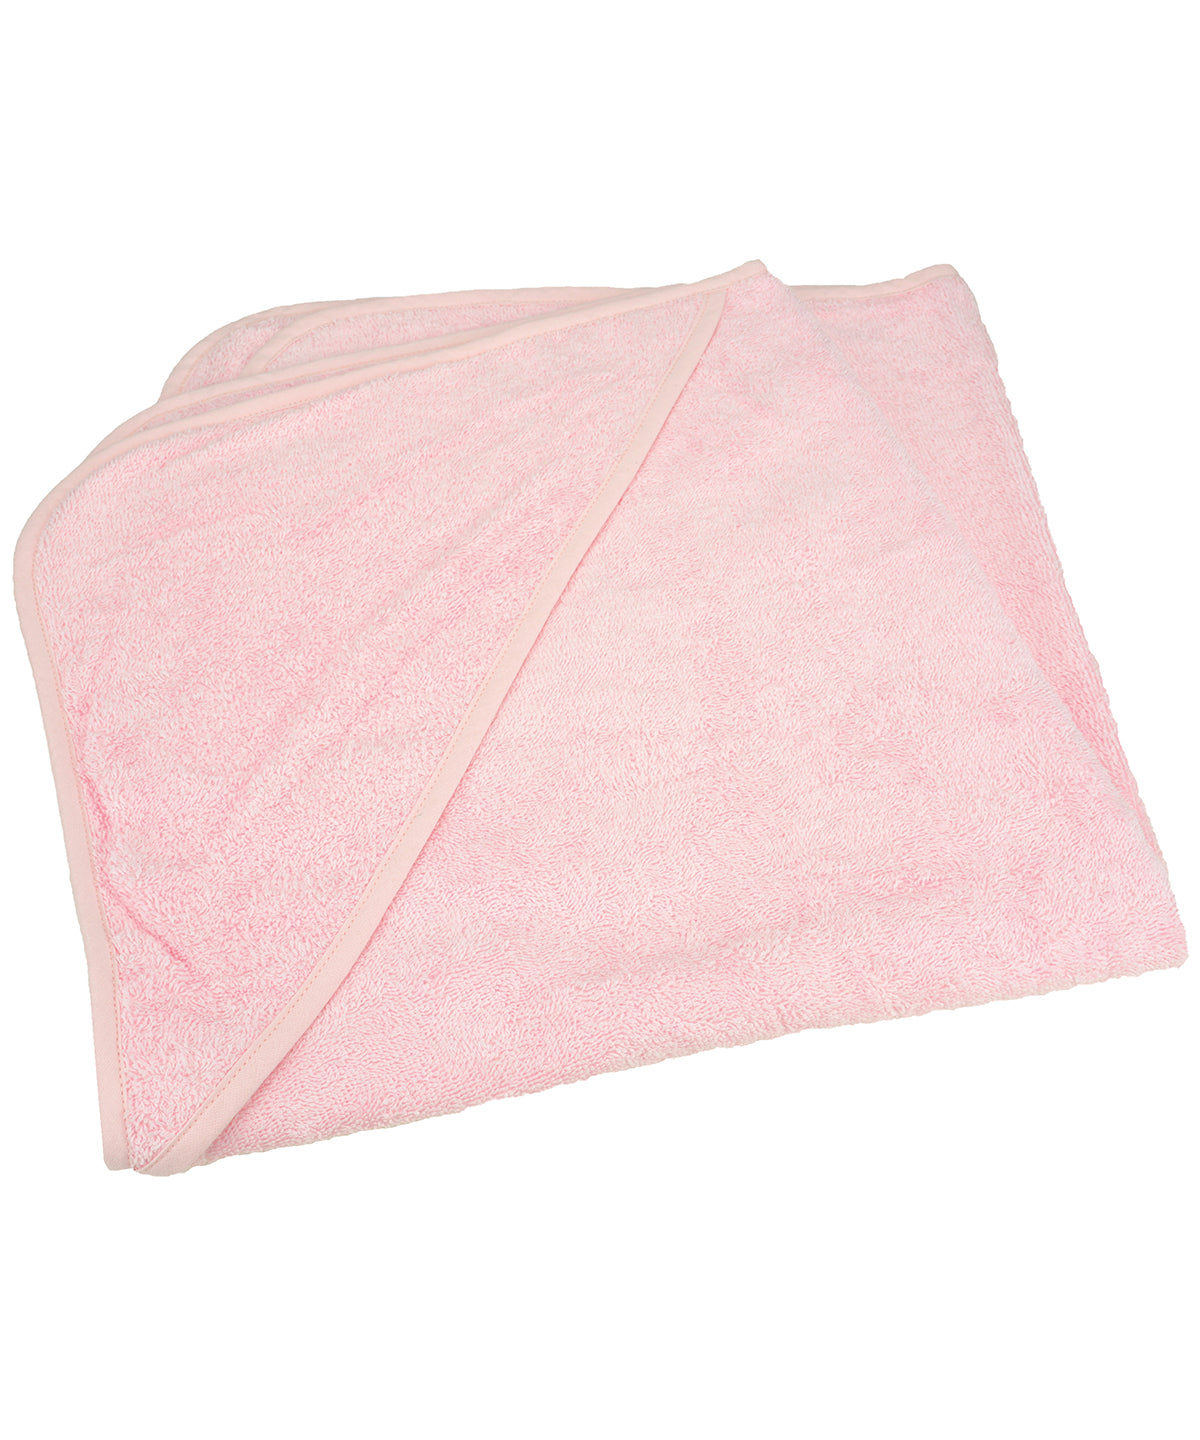 Personalised Towels - Light Pink A&R Towels ARTG® Babiezz® medium baby hooded towel